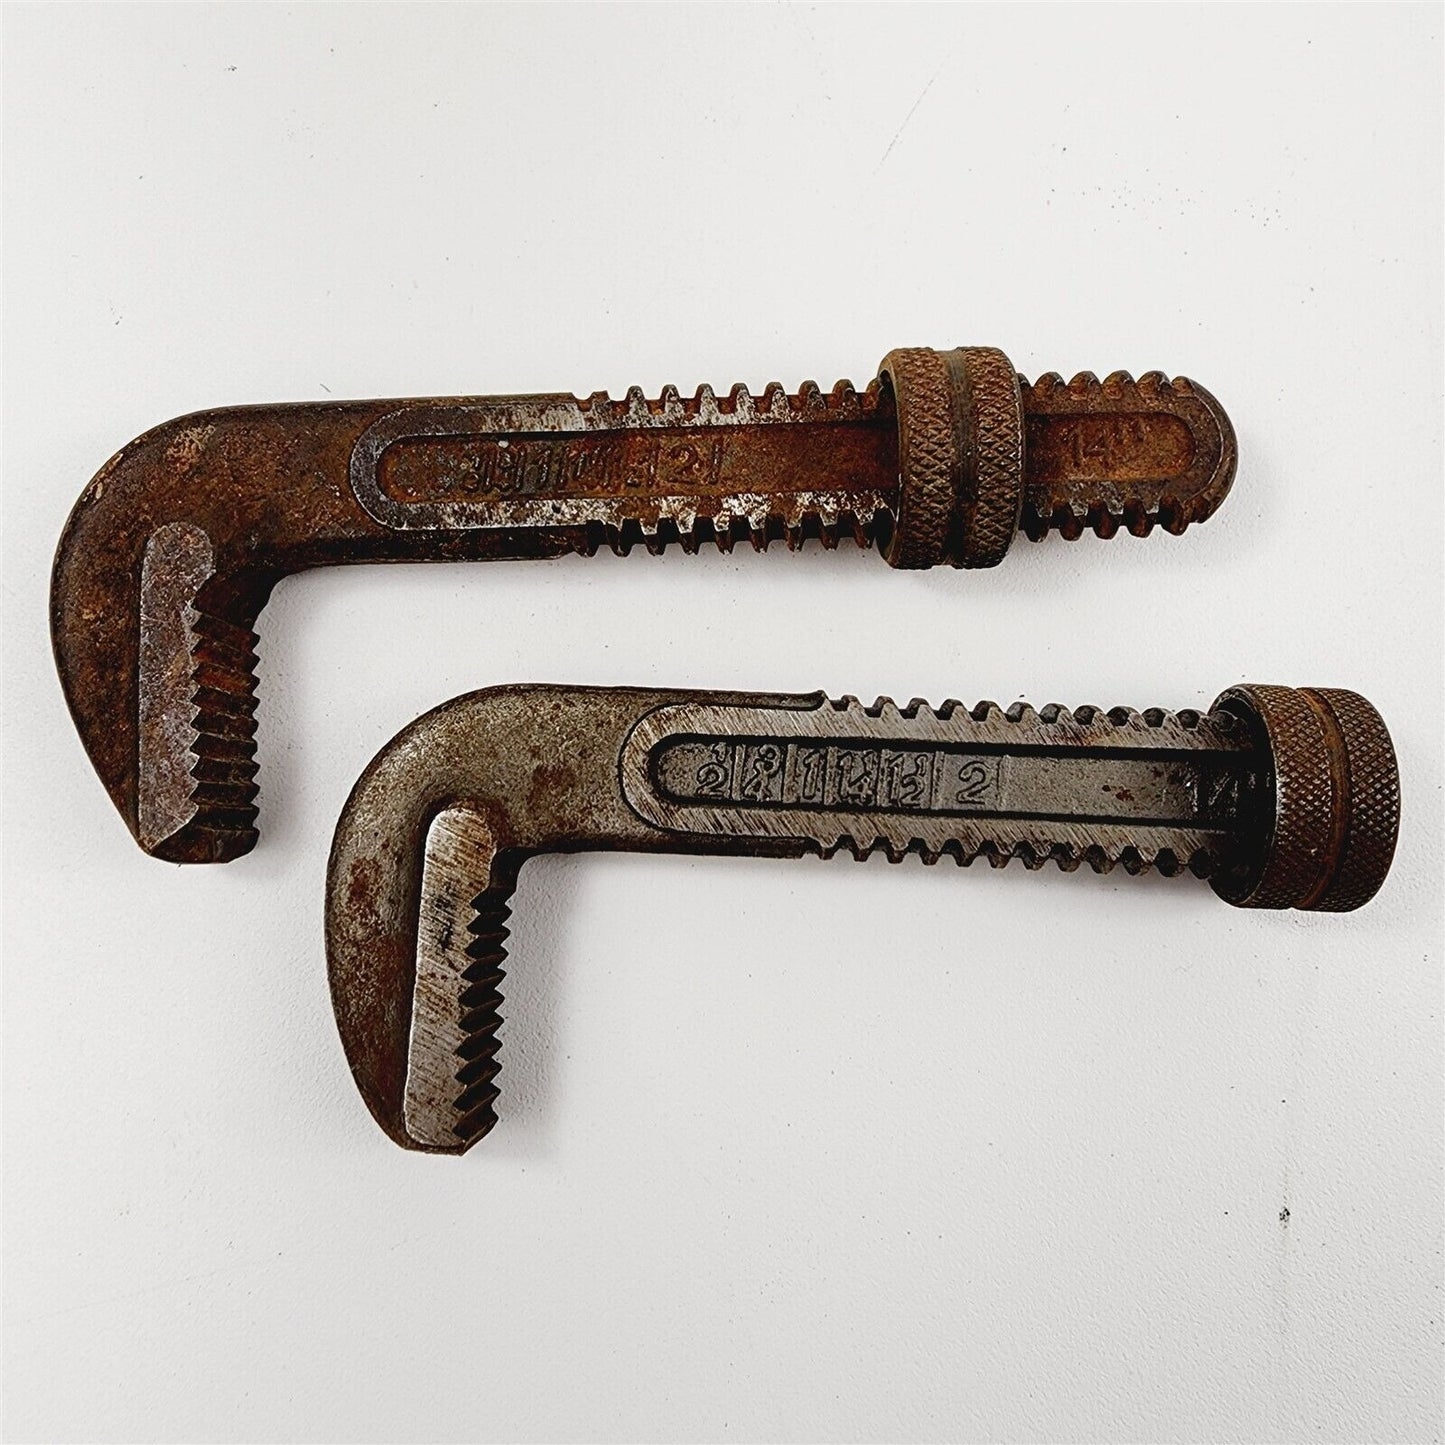 5 Pipe Wrench Replacement Jaws - 14"